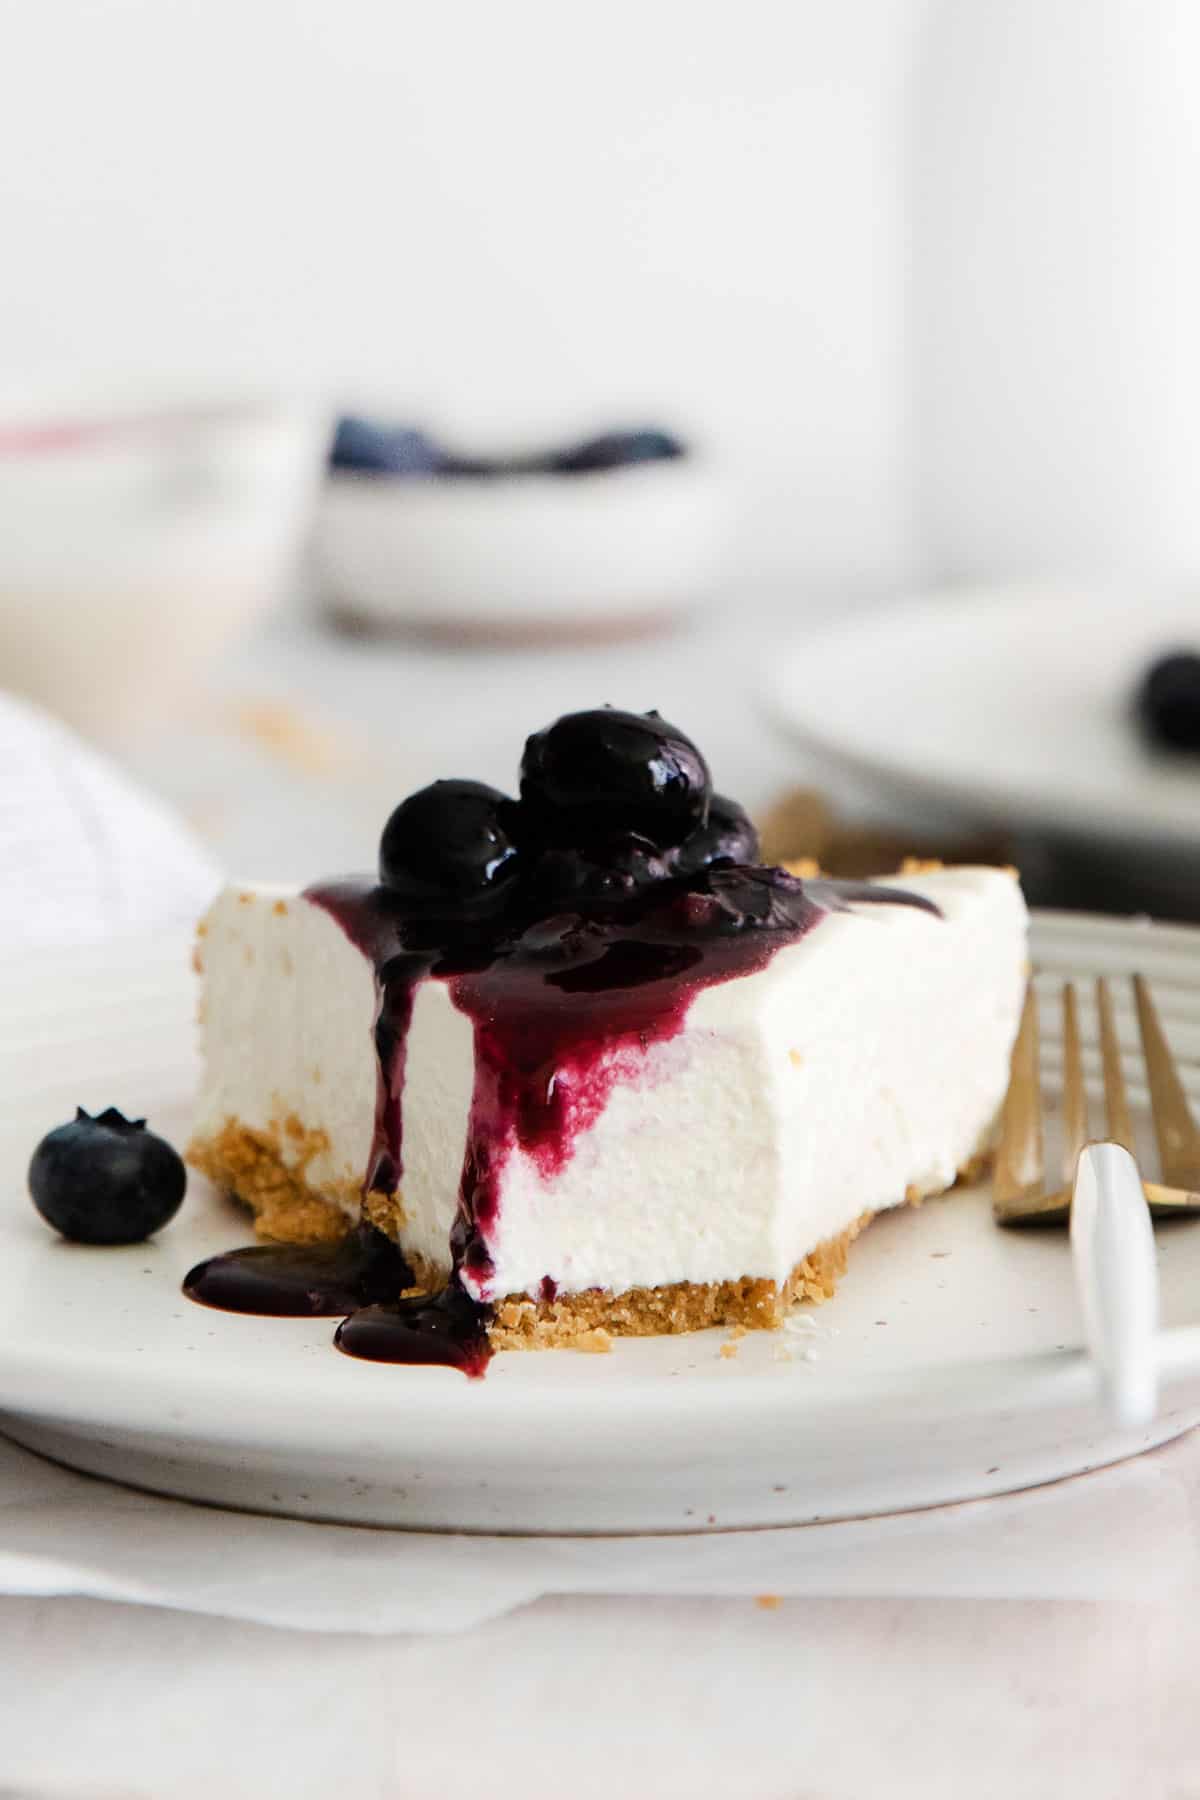 A slice of gluten-free no-bake cheesecake on a plate with blueberries on top